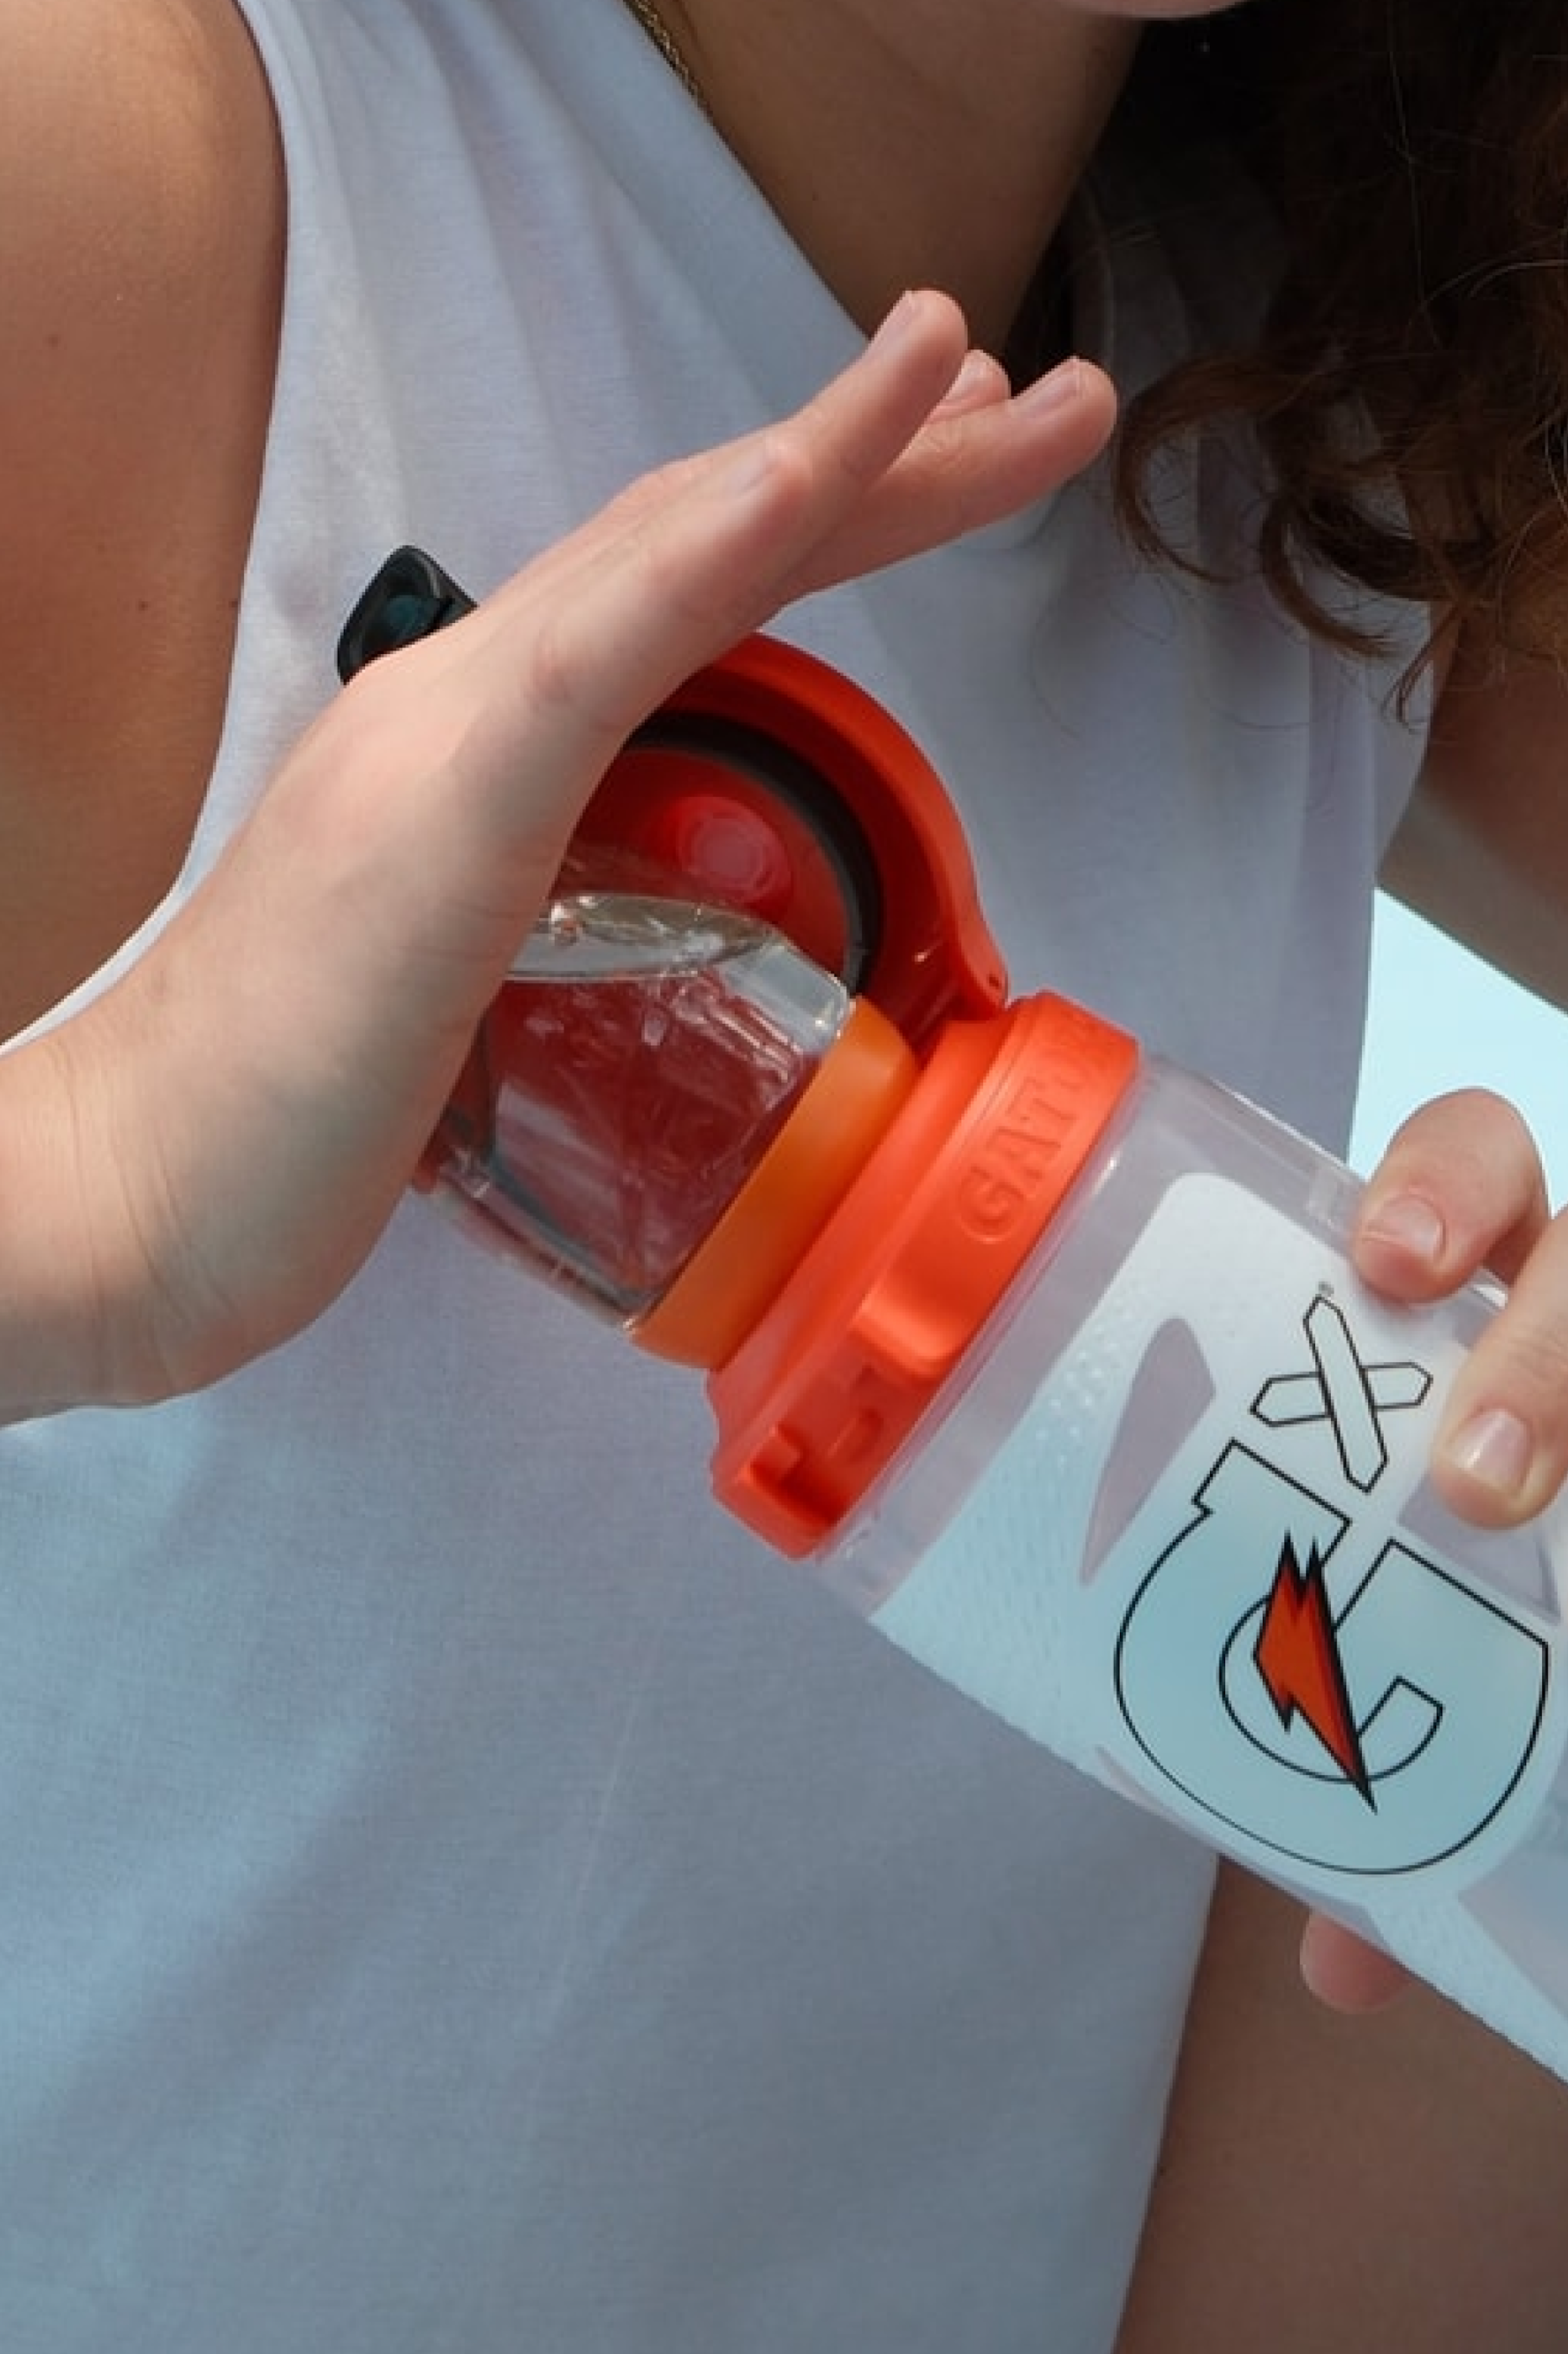 Gx Pod being used with Gx bottle